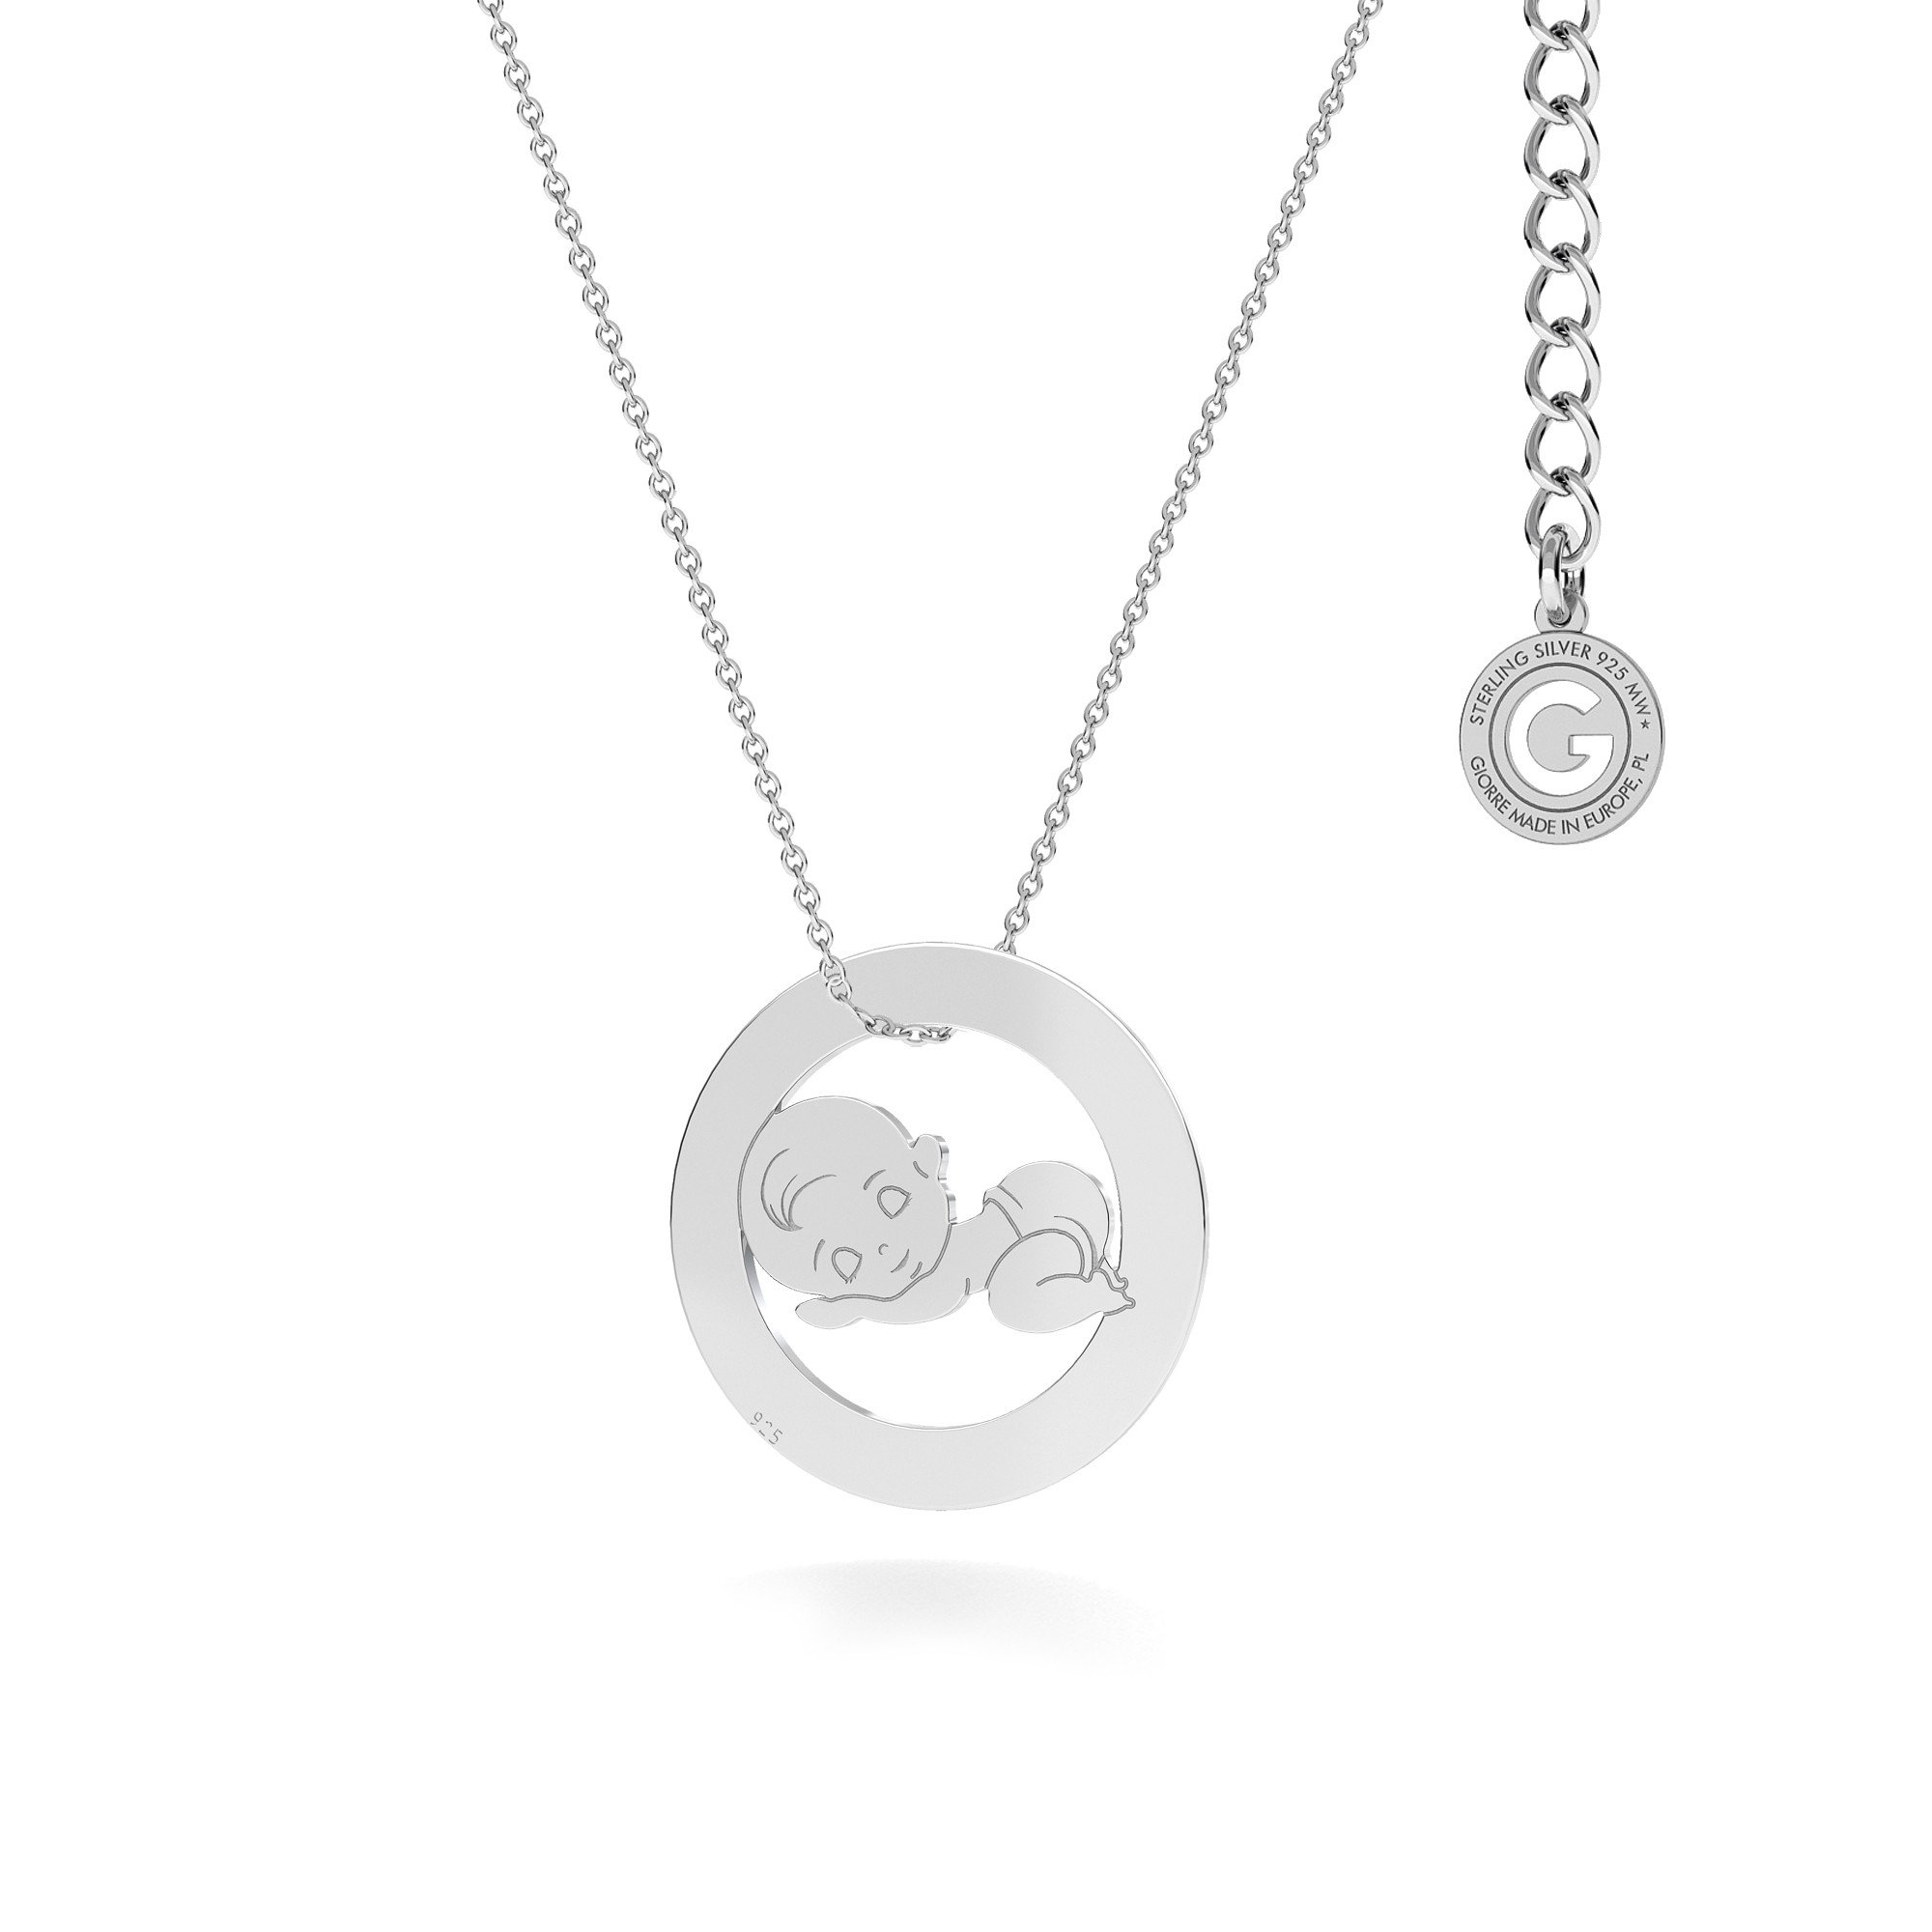 Necklace for mother & child, boy engraveing, sterling silver 925